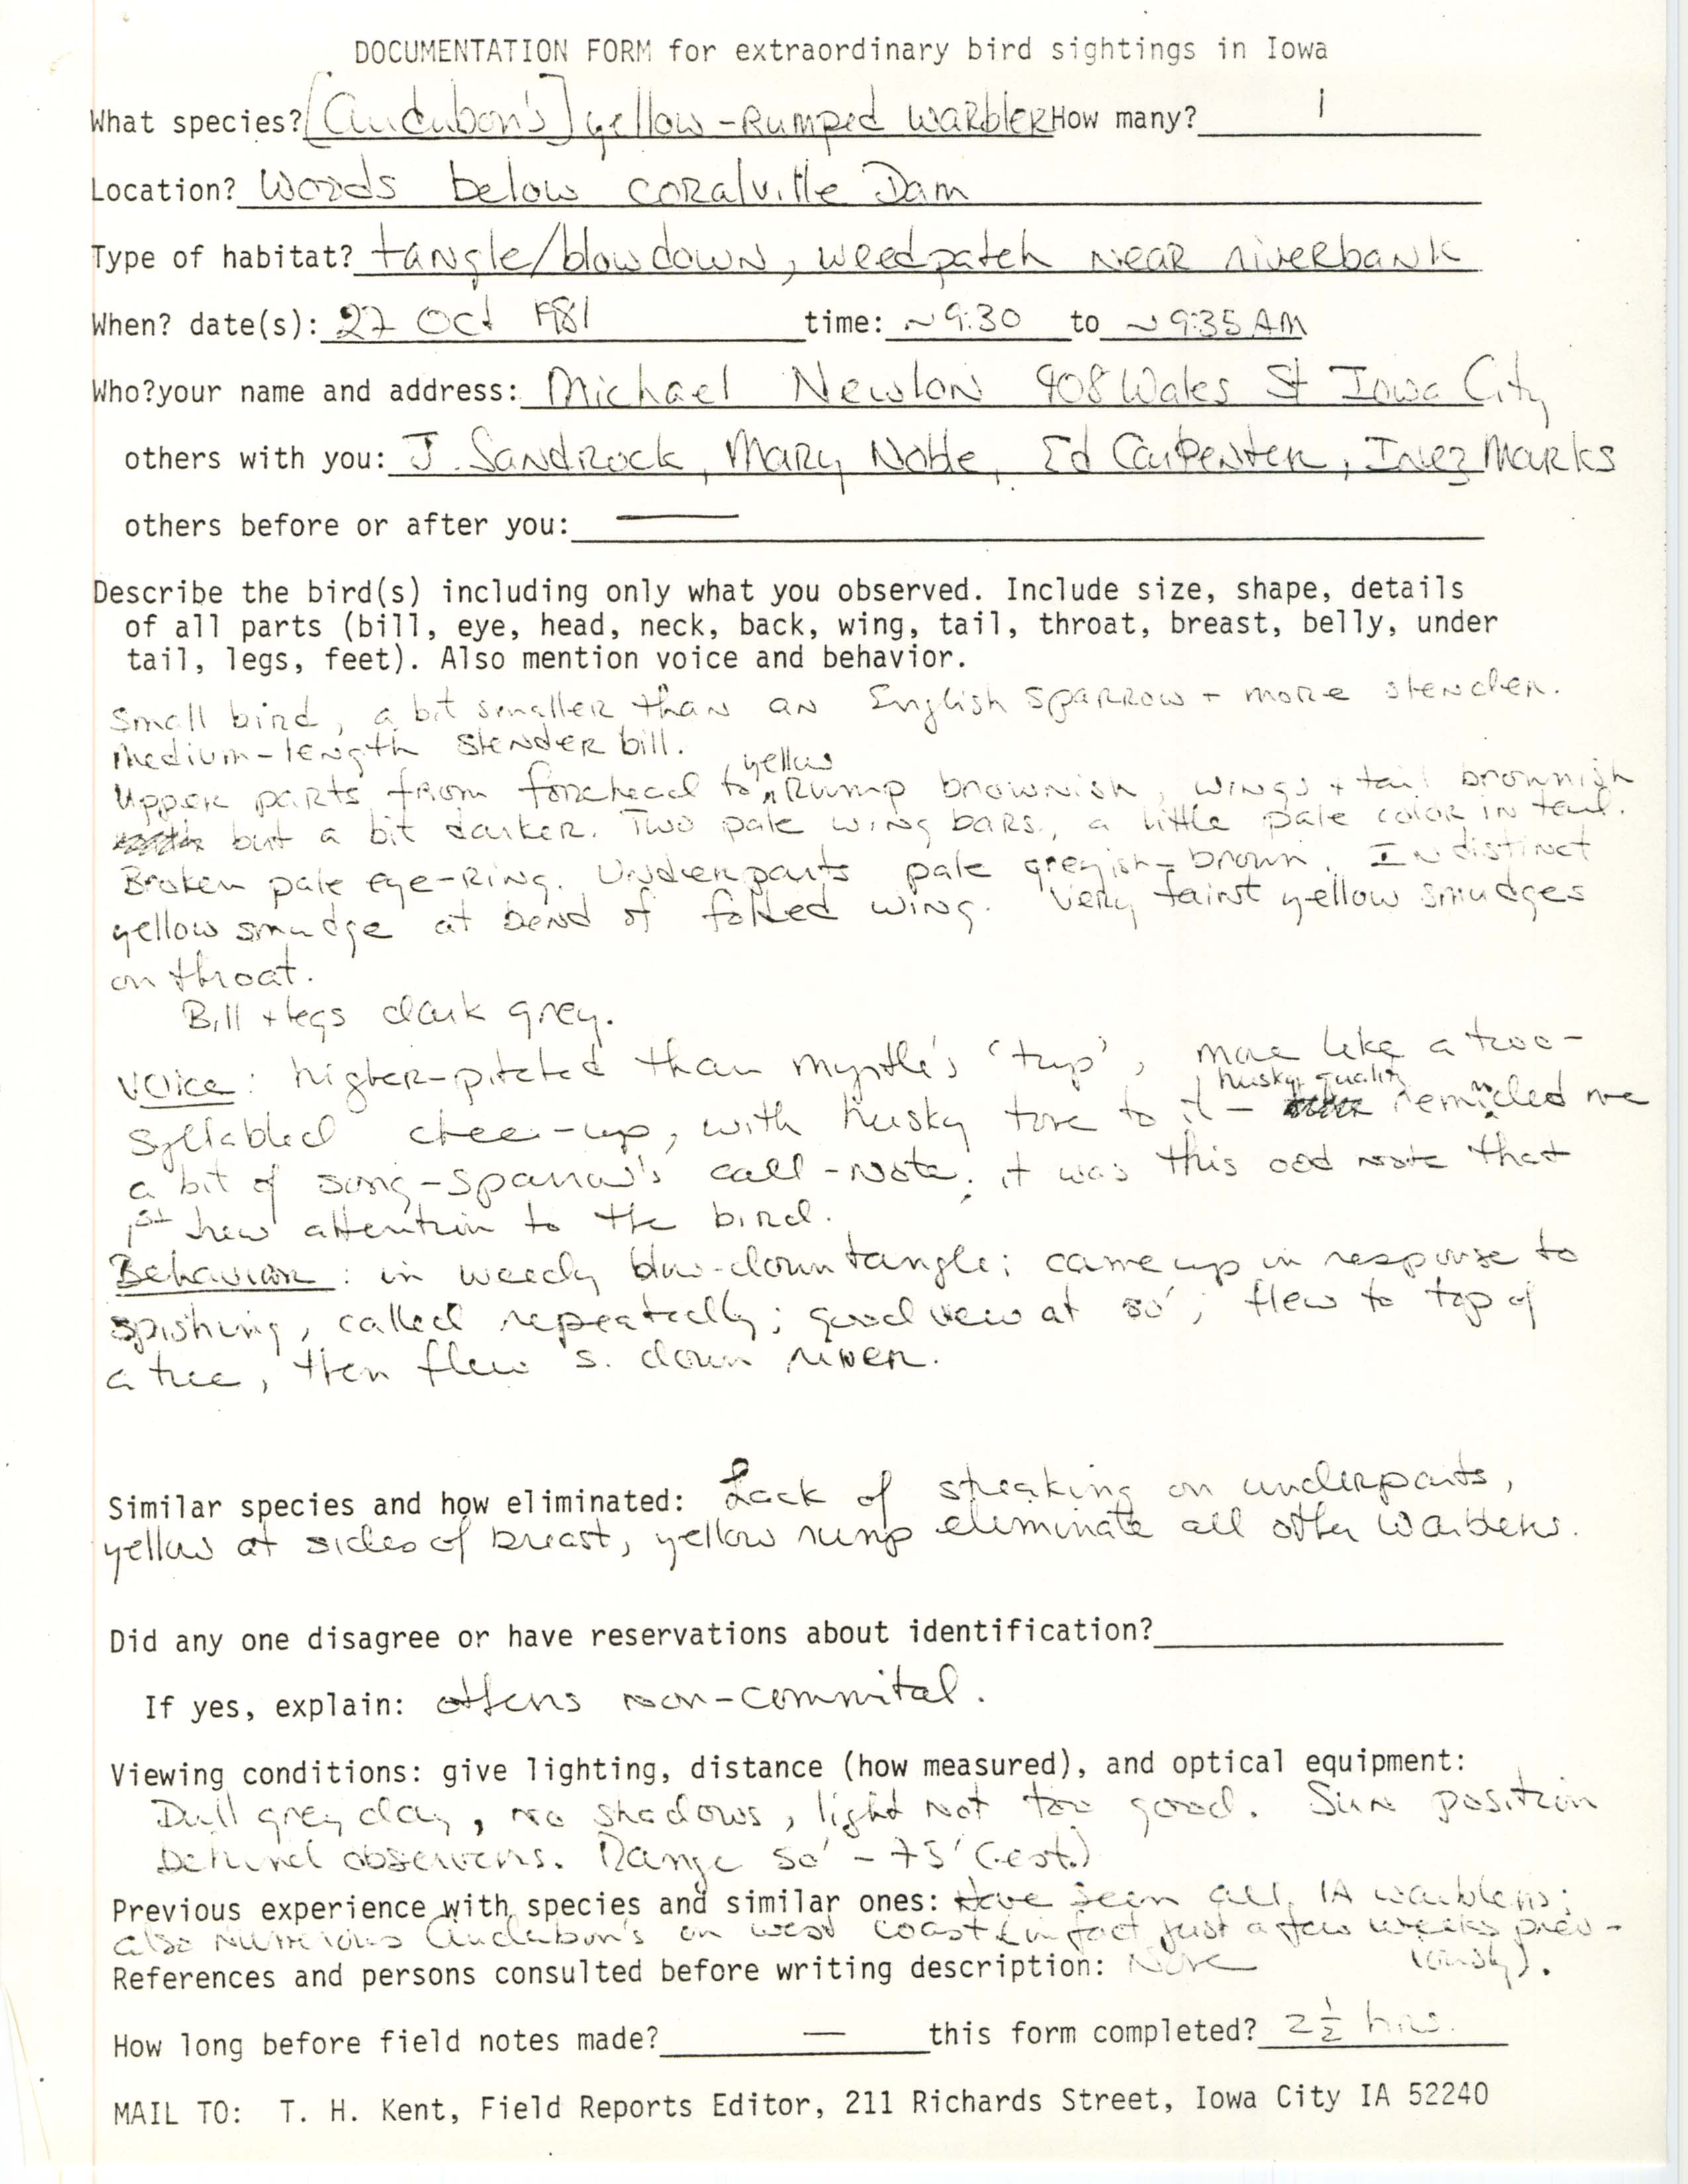 Rare bird documentation form for Yellow-rumped Warbler at Coralville Dam, 1981